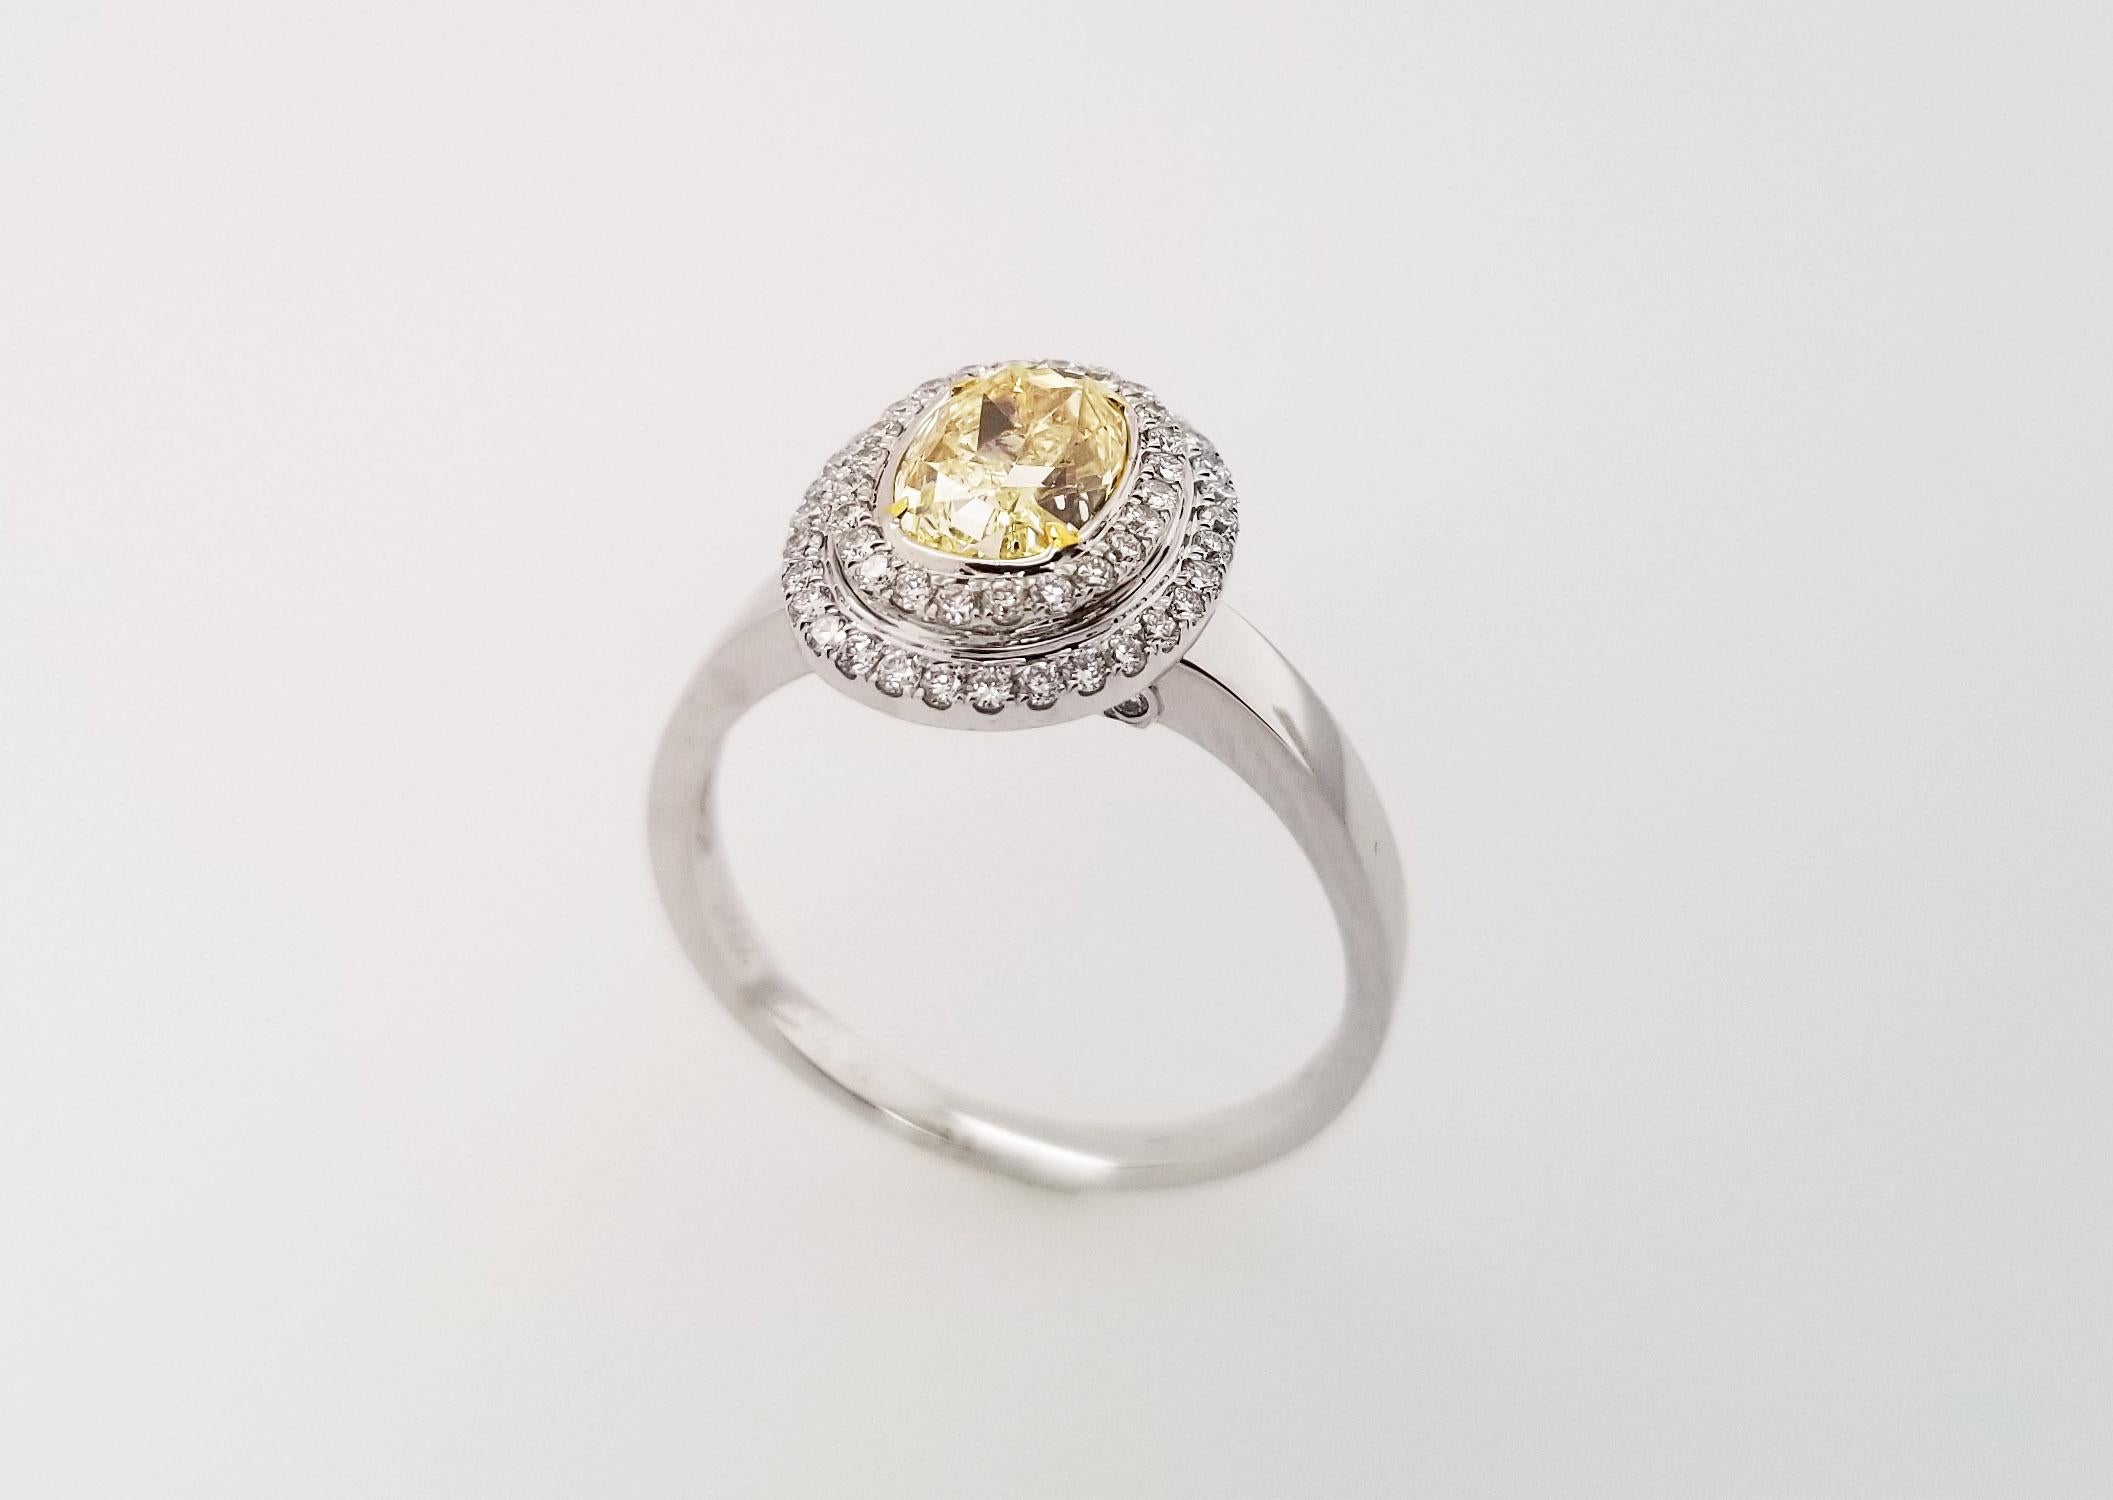 Oval Cut Mother's Day Gift: Scarselli GIA-Certified 1.20 Carat Fancy Light Yellow Diamond For Sale